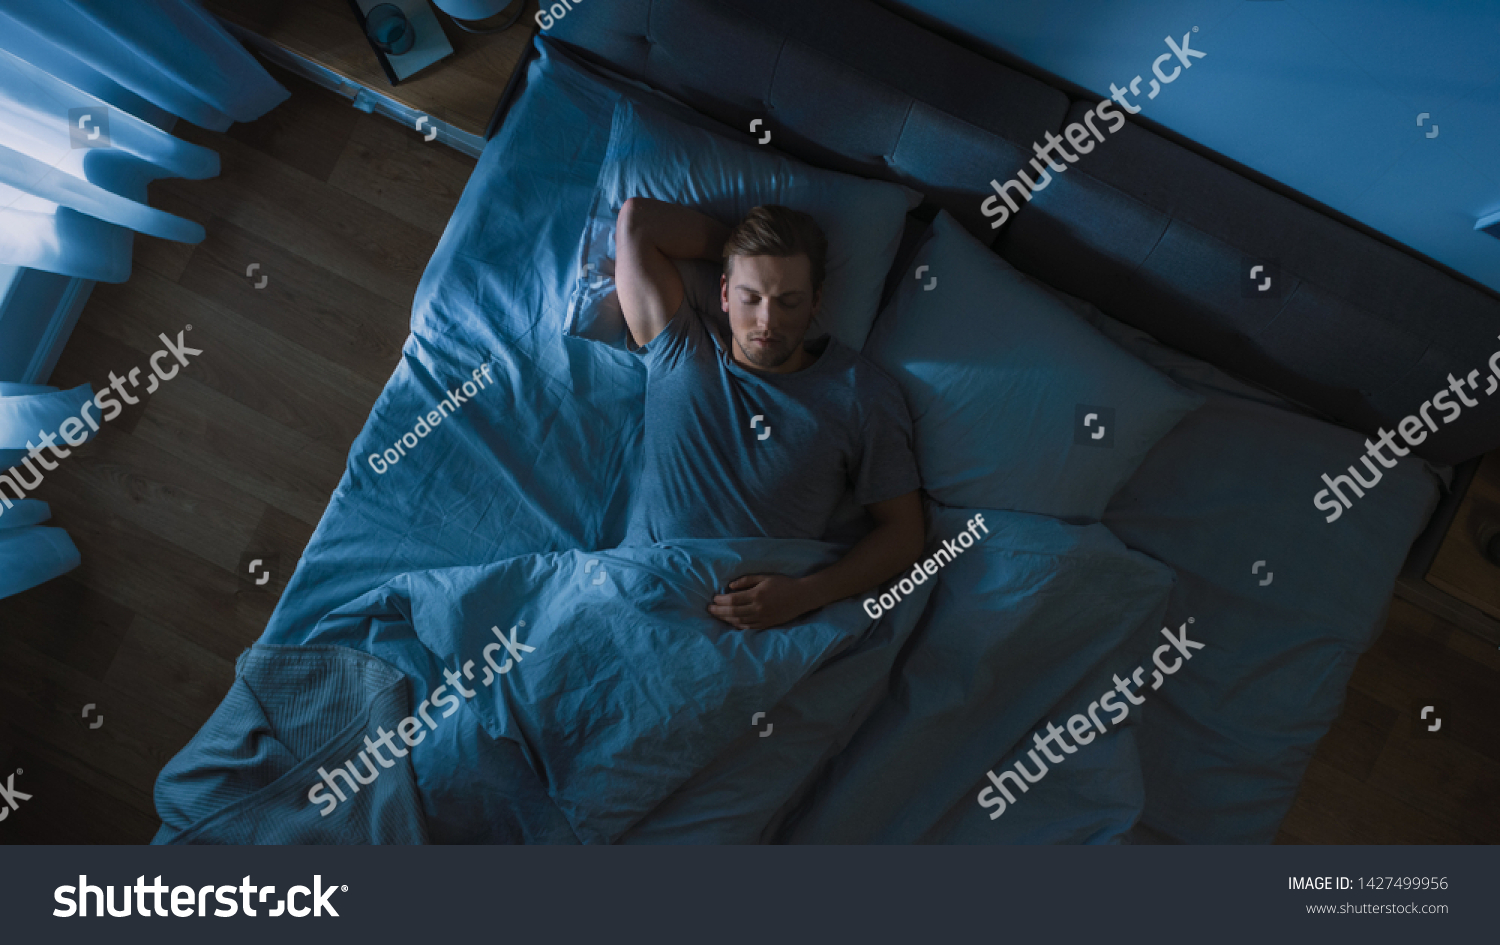 Top View Handsome Young Man Sleeping Stock Photo 1427499956 | Shutterstock